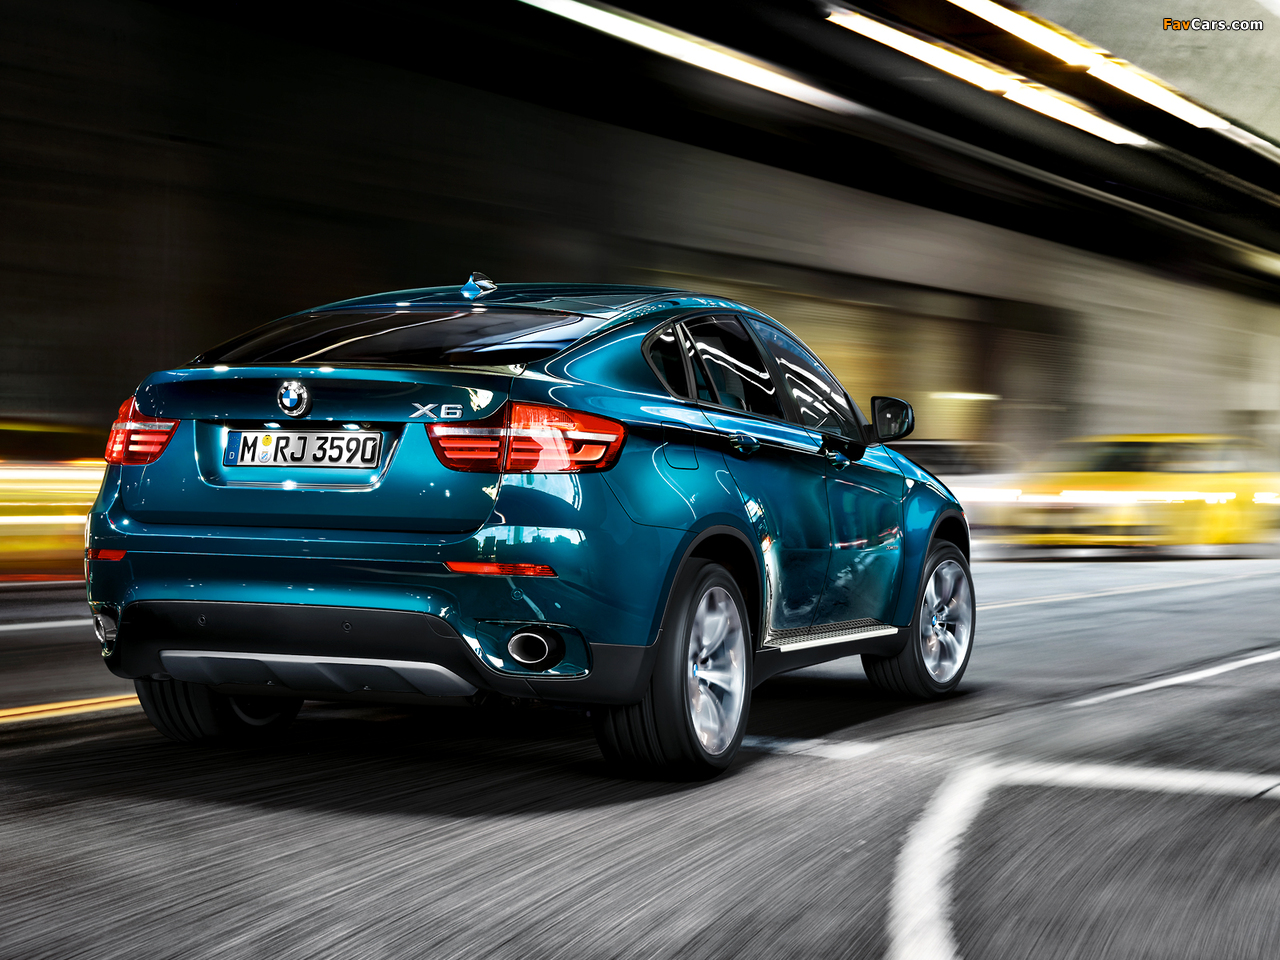 BMW X6 xDrive35i (E71) 2012 pictures (1280 x 960)